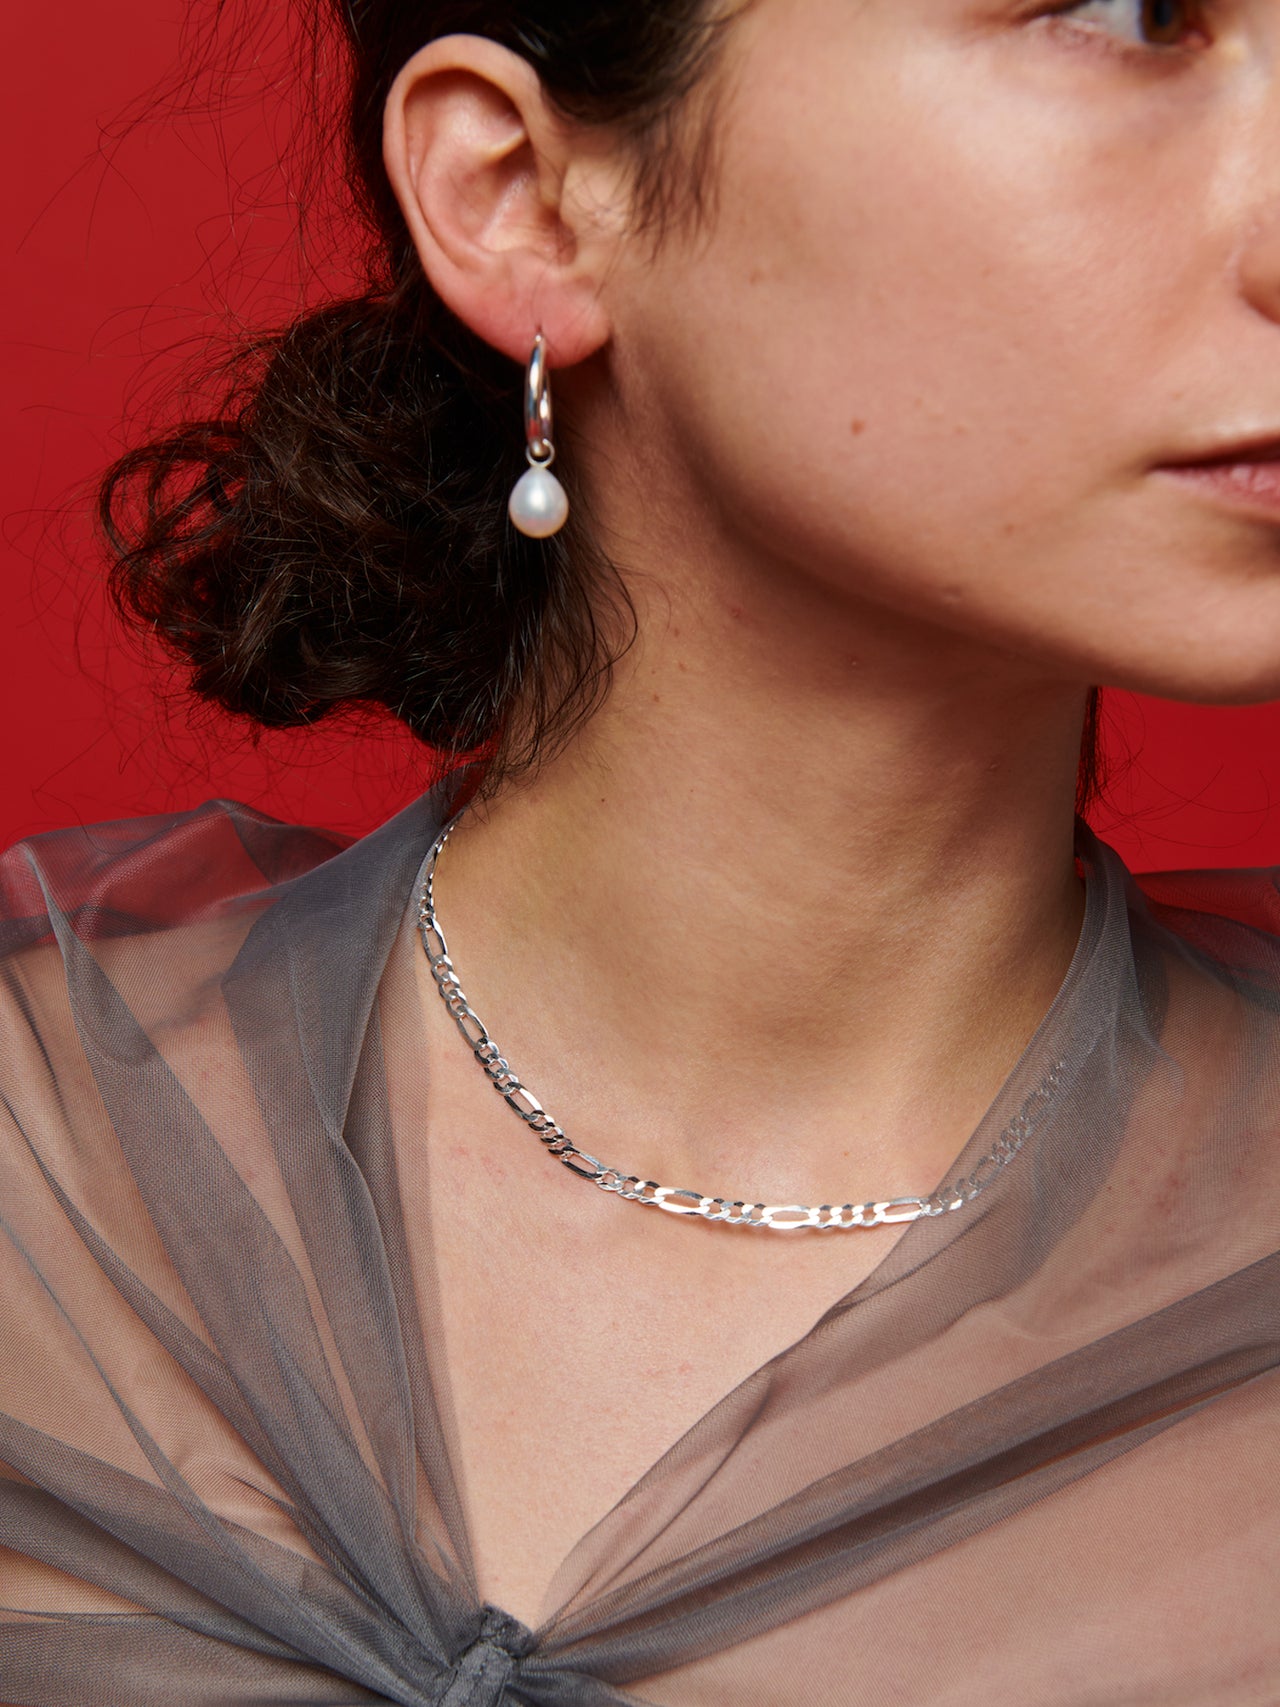 Pearl Charm Hoops pictured on model. Red background. 